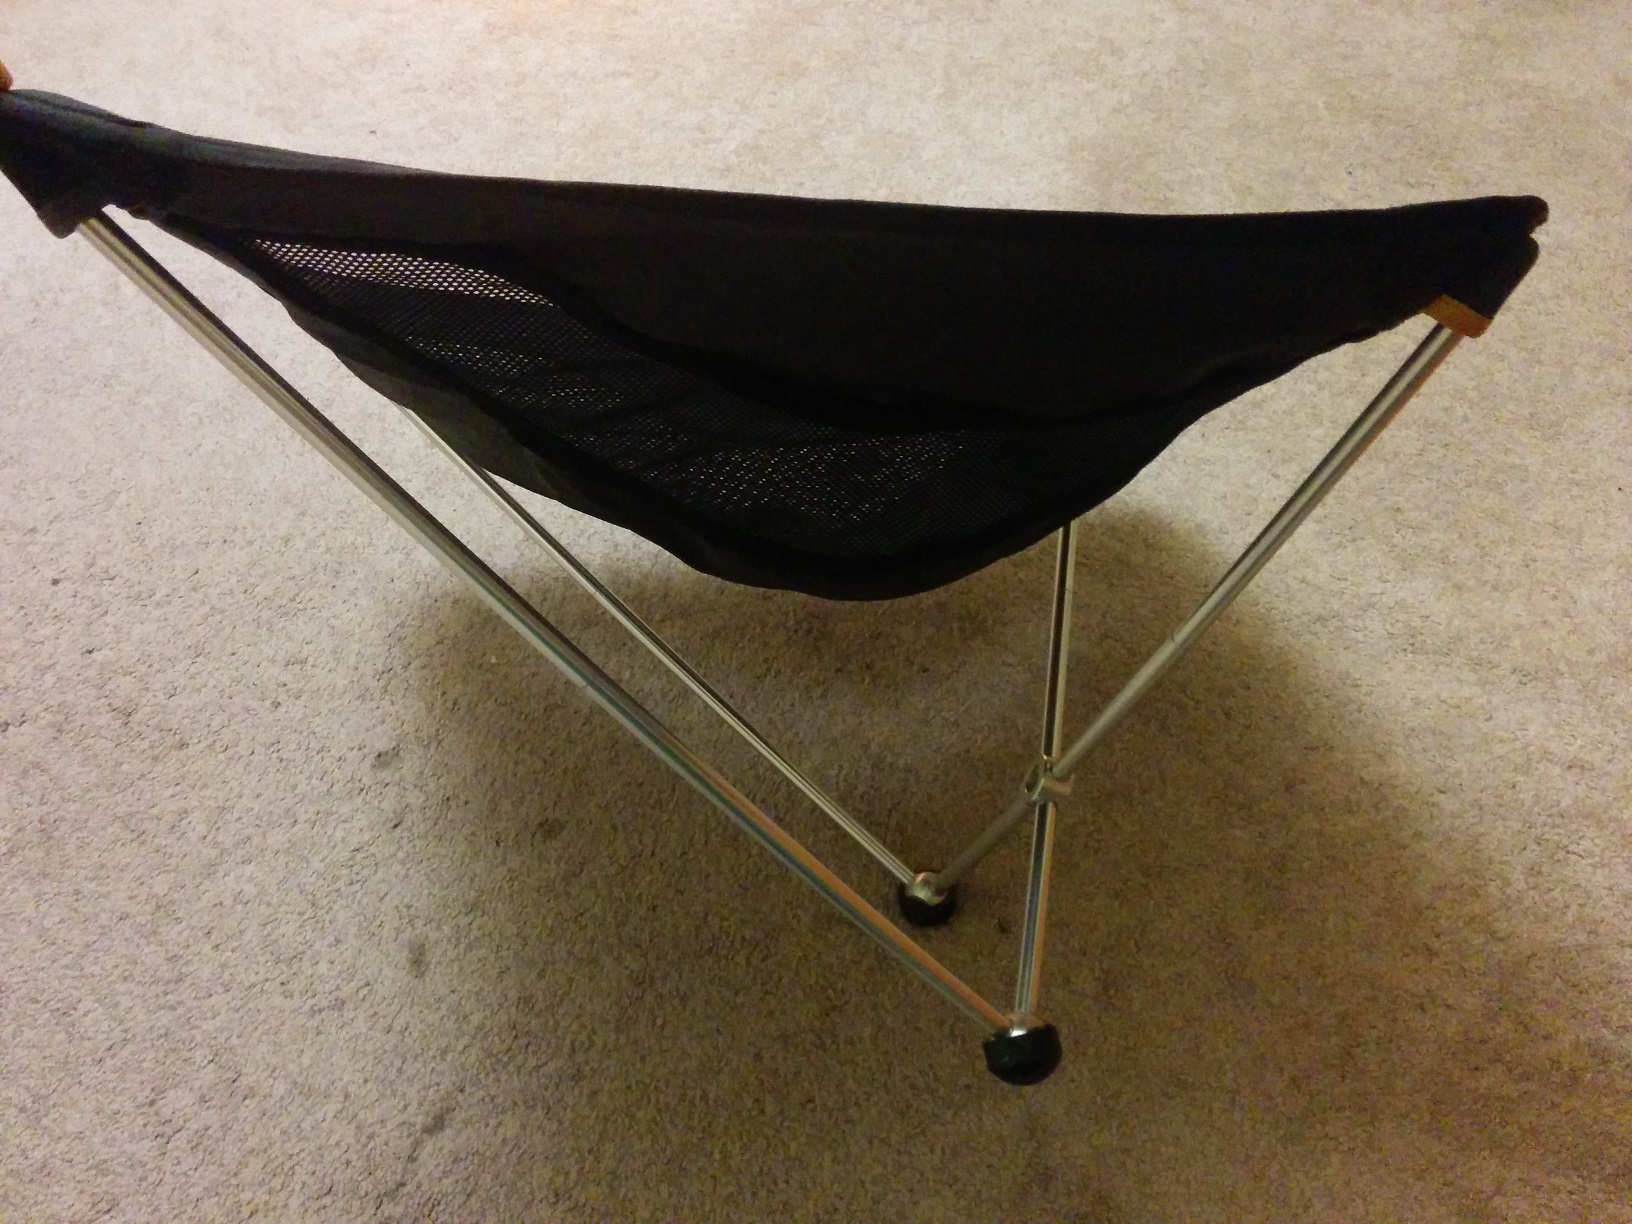 The camping chair from the side, with the two legs on the bottom and the seat above.